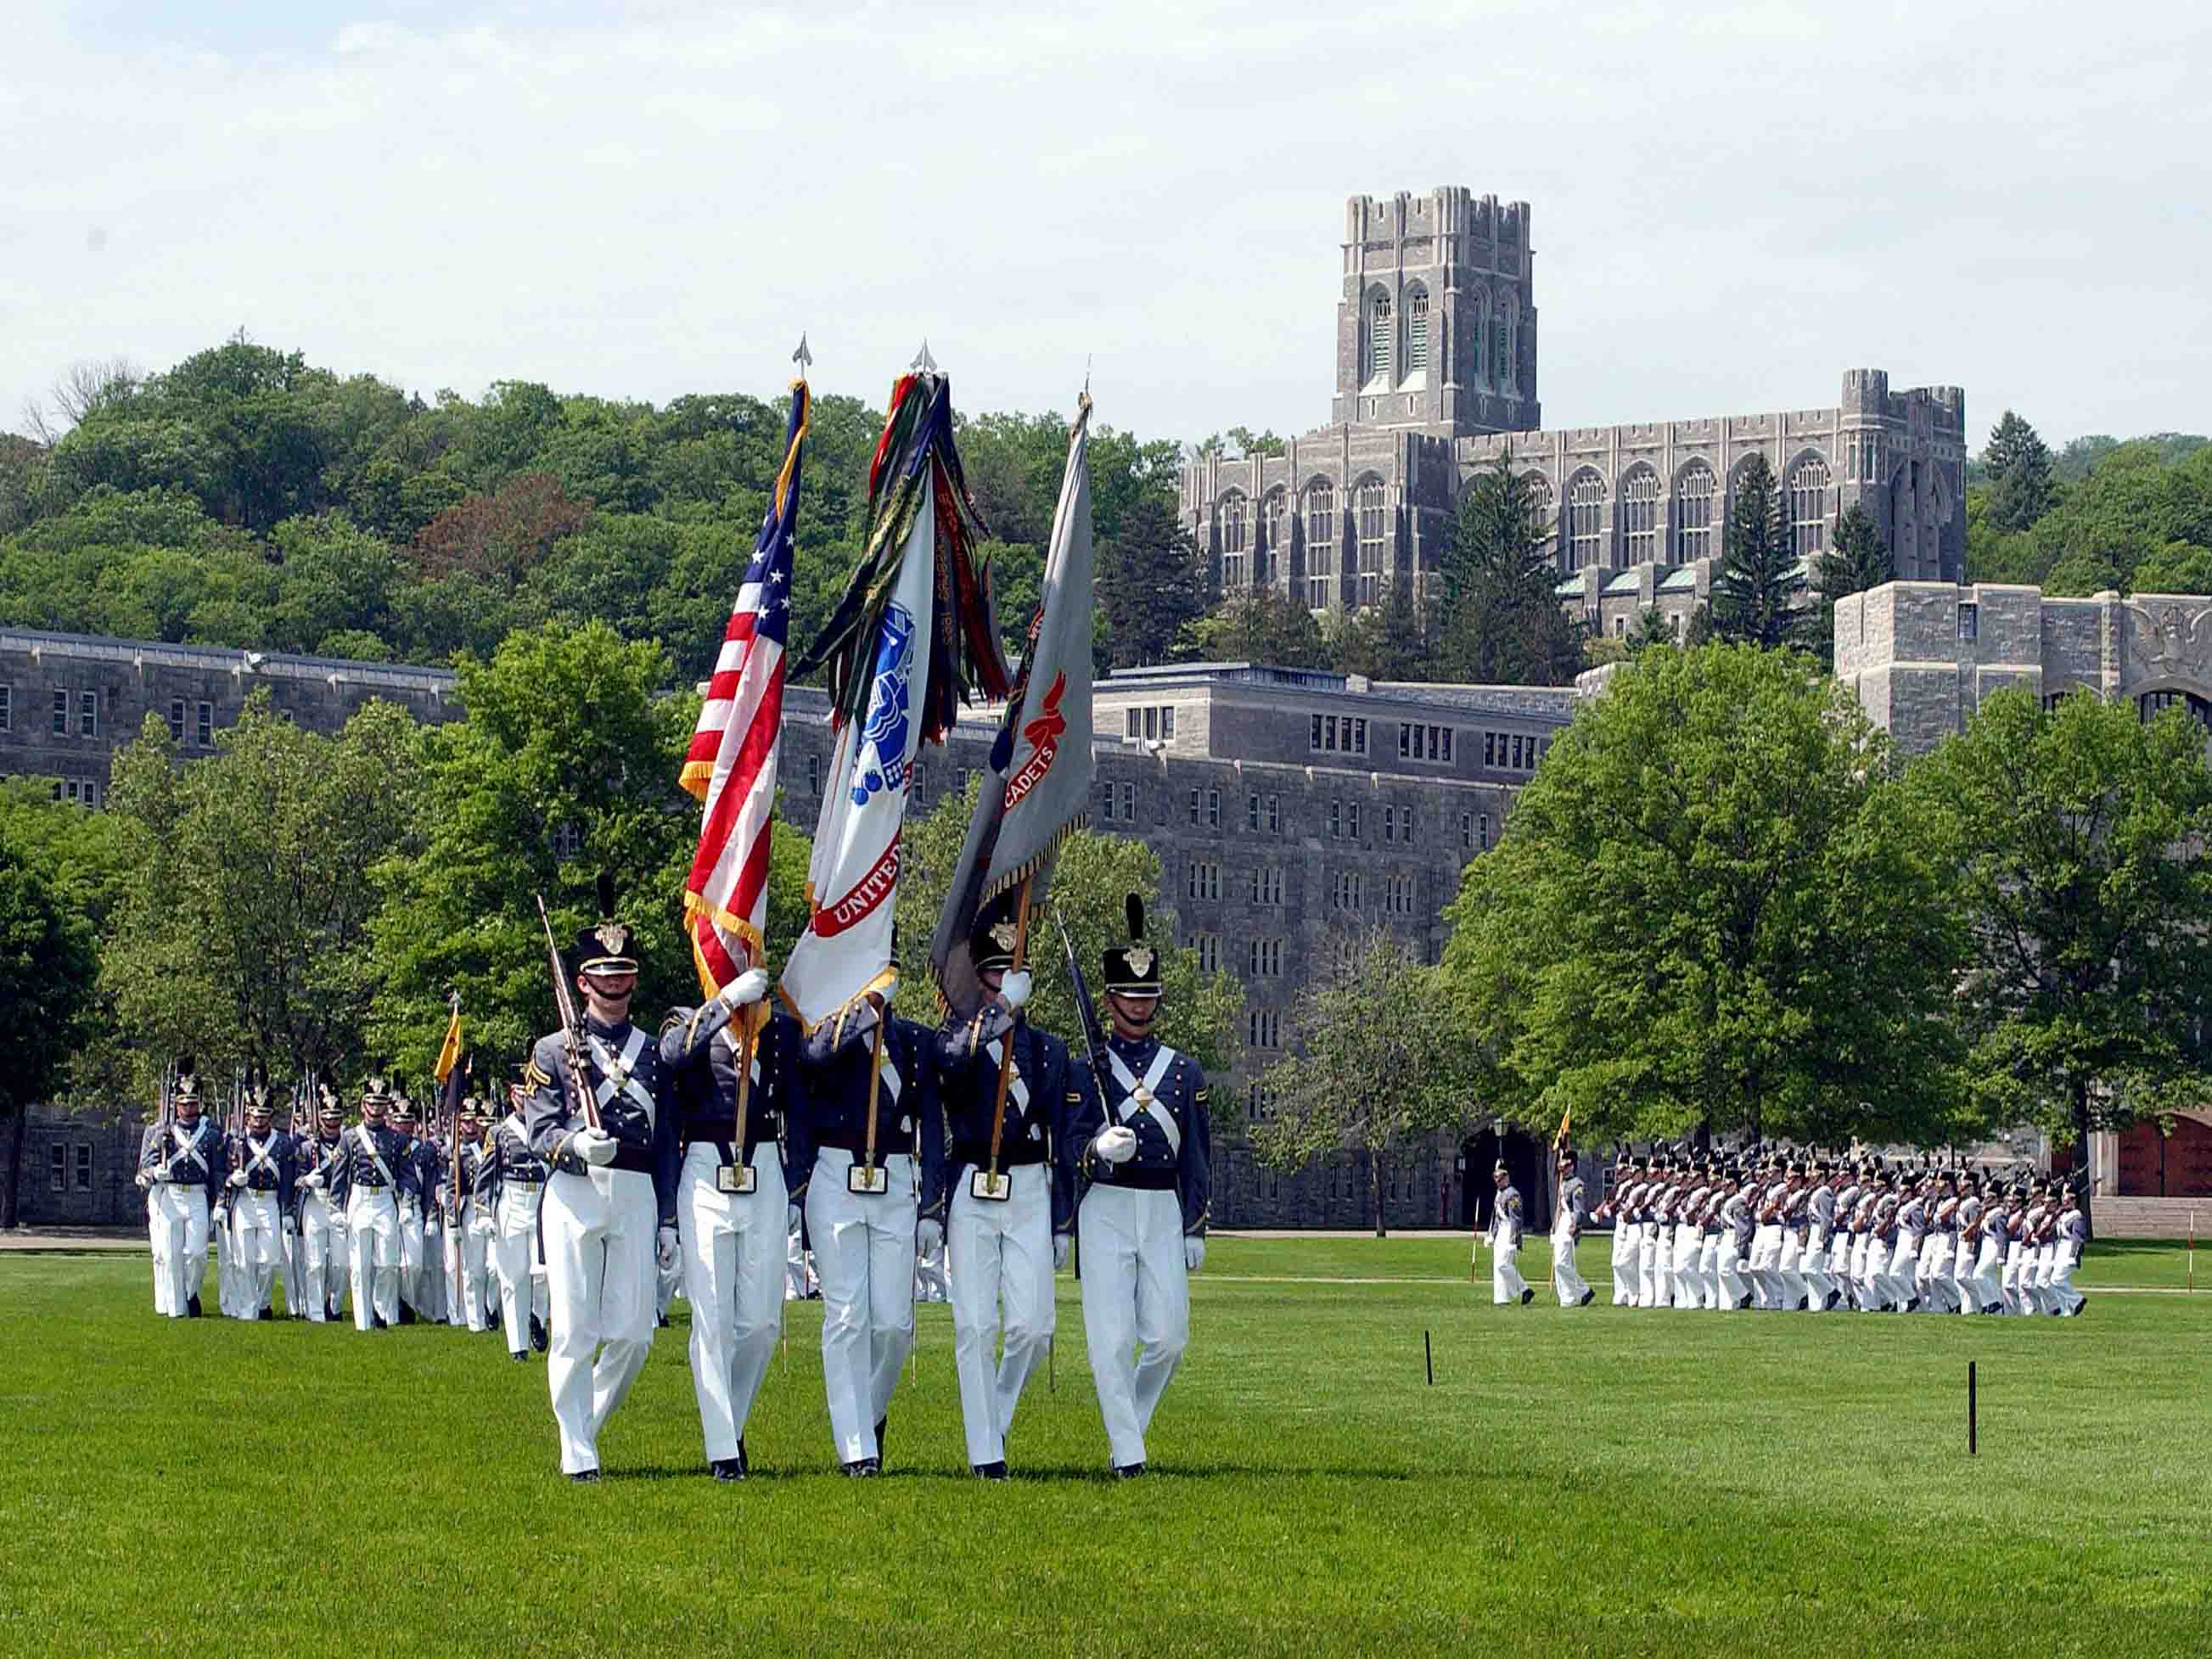 Cadets at United States Military Academy at West Point